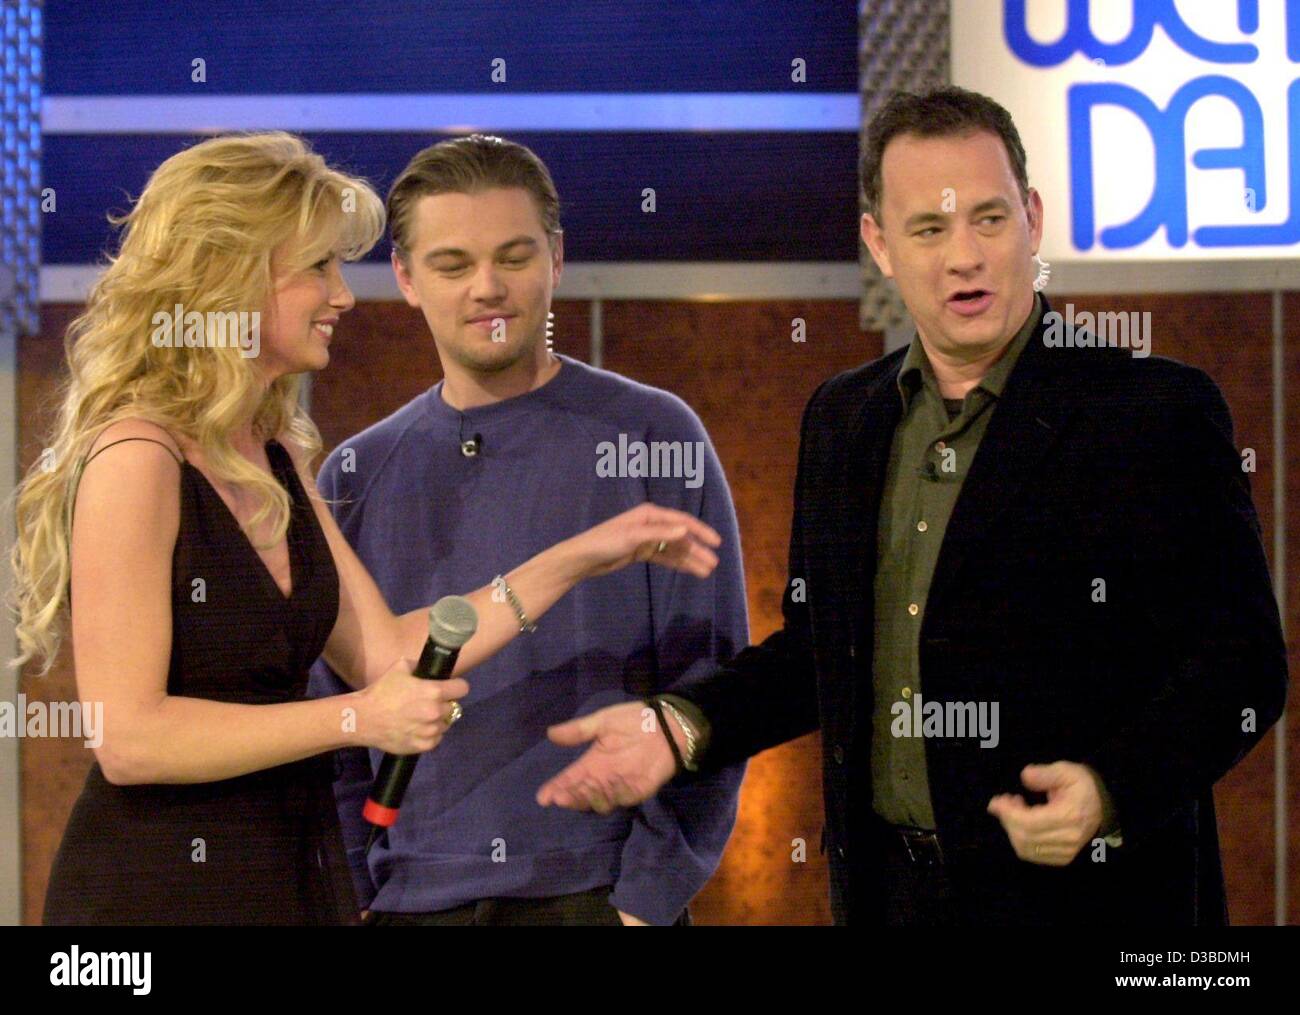 (dpa) - US singer Faith Hill (L) greets US actors Leonardo DiCaprio (C) and Tom Hanks (R) during the German TV show 'Wetten dass...?' (bet that...?), in Boeblingen, Germany, 25 January 2003. The two Hollywood stars promoted their new film 'Catch Me If You Can' during Germany's most successful TV sho Stock Photo